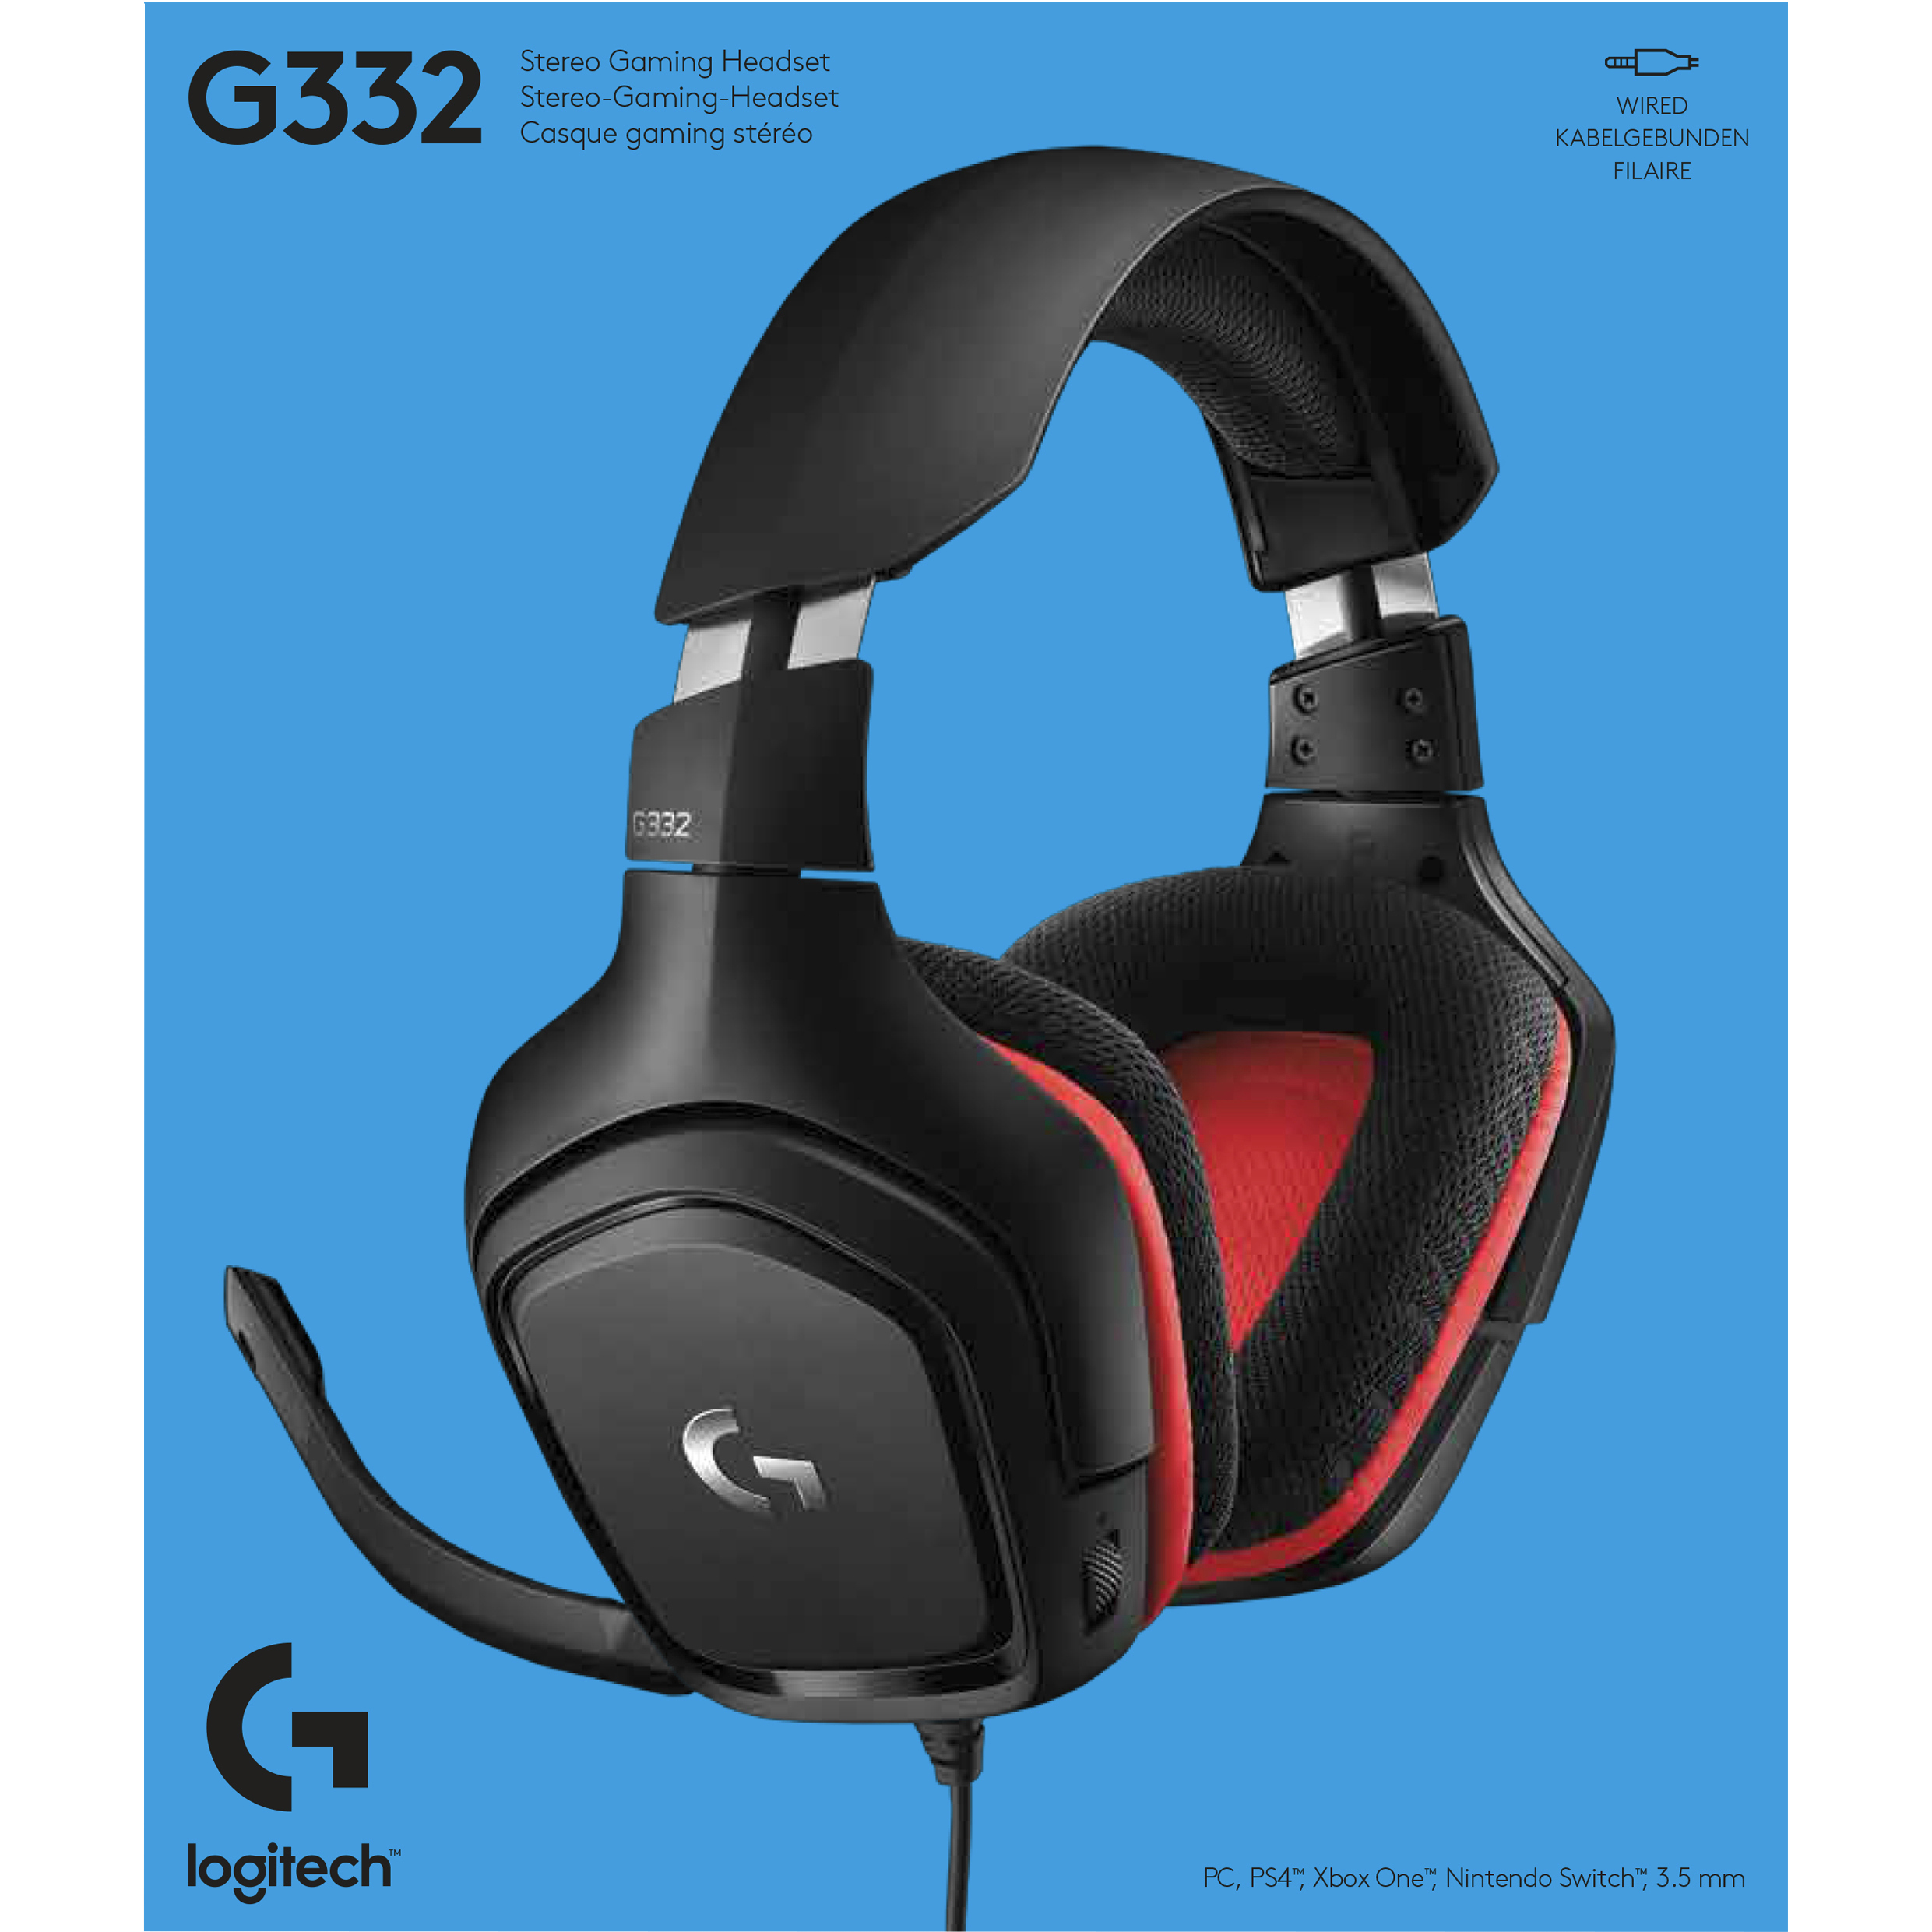 Logitech G332 Wired Gaming Headset, Rotating Leatherette Ear Cups, 3.5 mm Audio Jack, Flip-to-Mute Mic, Lightweight for PC,Xbox One,Xbox Series X|S,PS5,PS4,Nintendo Switch, Black - image 5 of 5